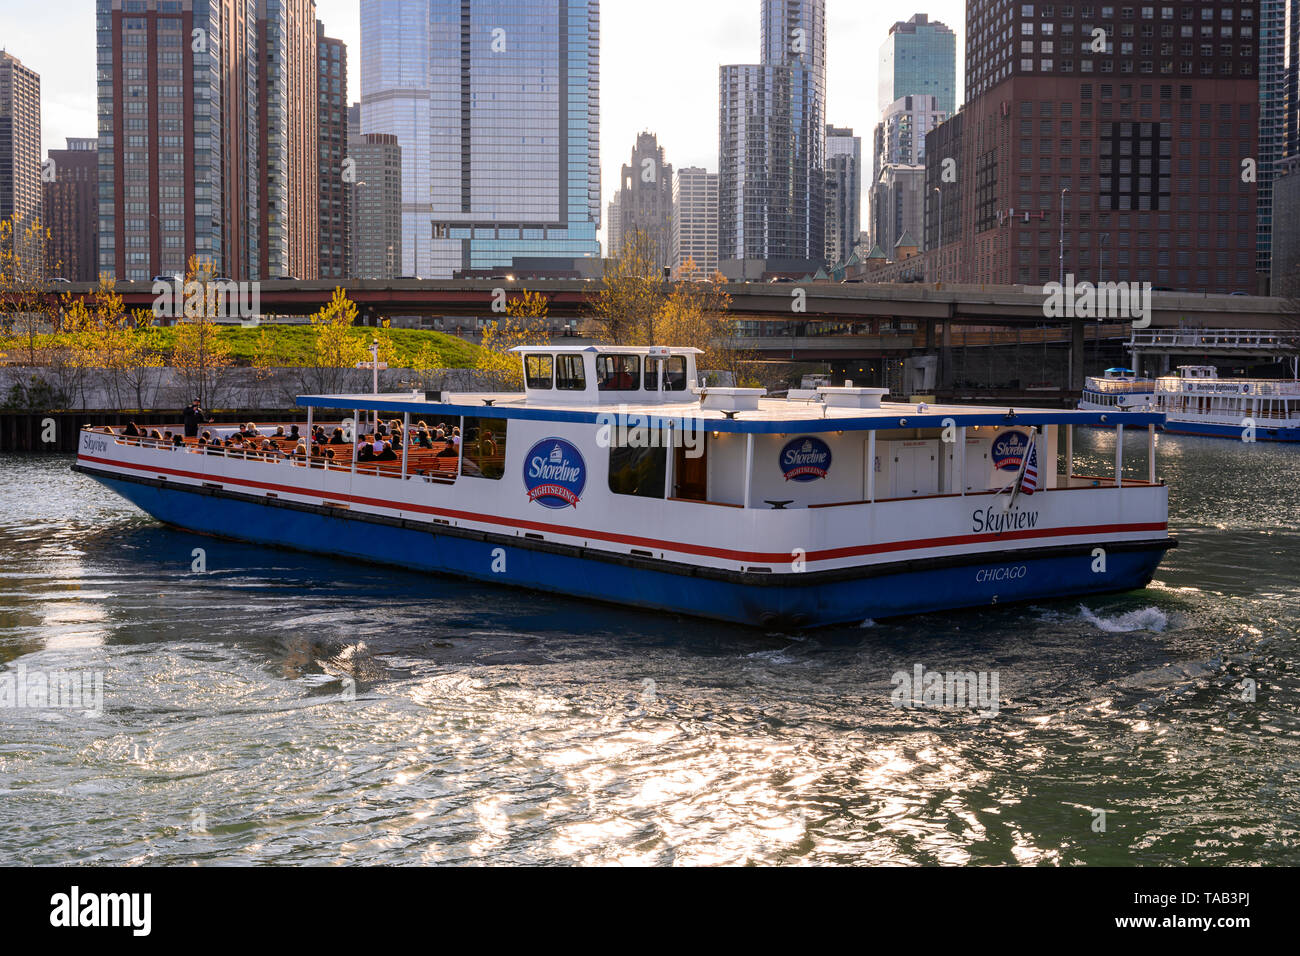 Chicago, IL, United States - May 9, 2019: Shoreline Sightseeing 'Skyview' tour boat turning around near the Ogden Slip in Chicago. Stock Photo